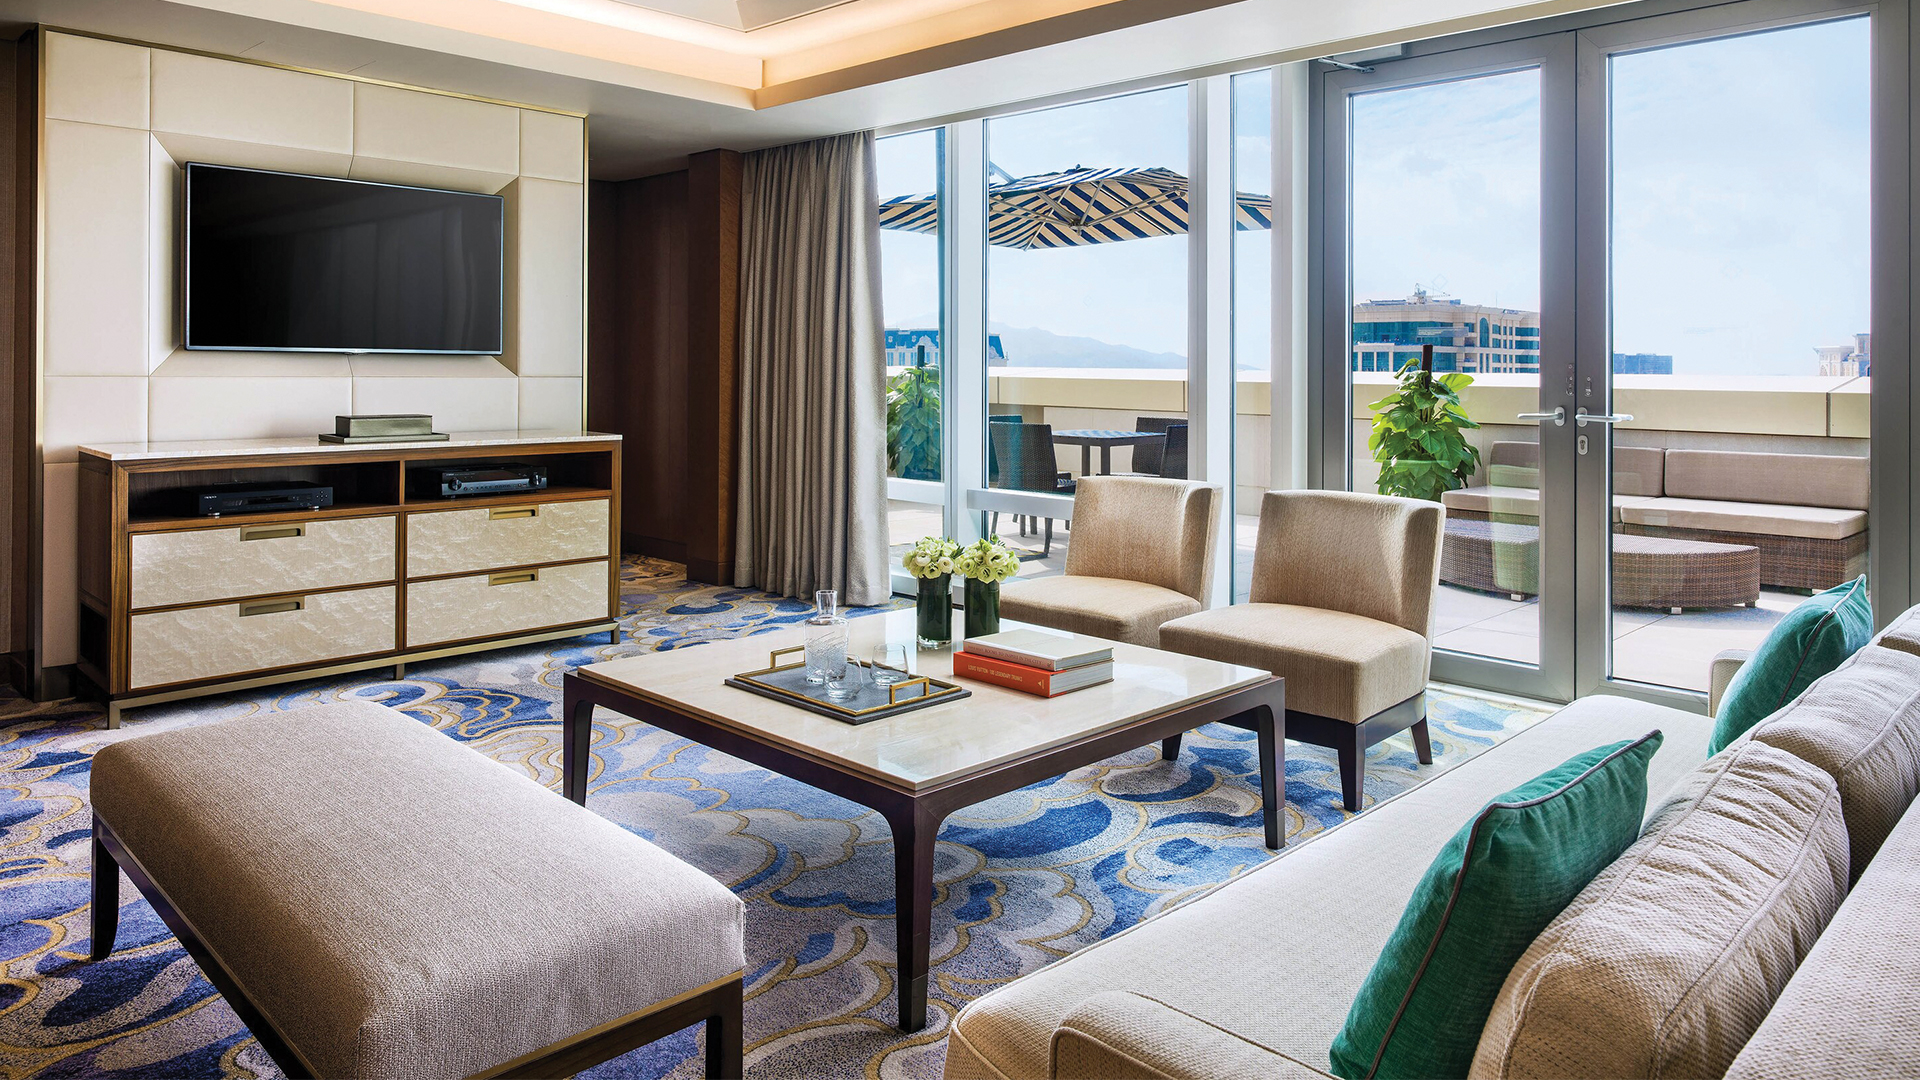 St. Regis suite with relaxing spaces inside and out